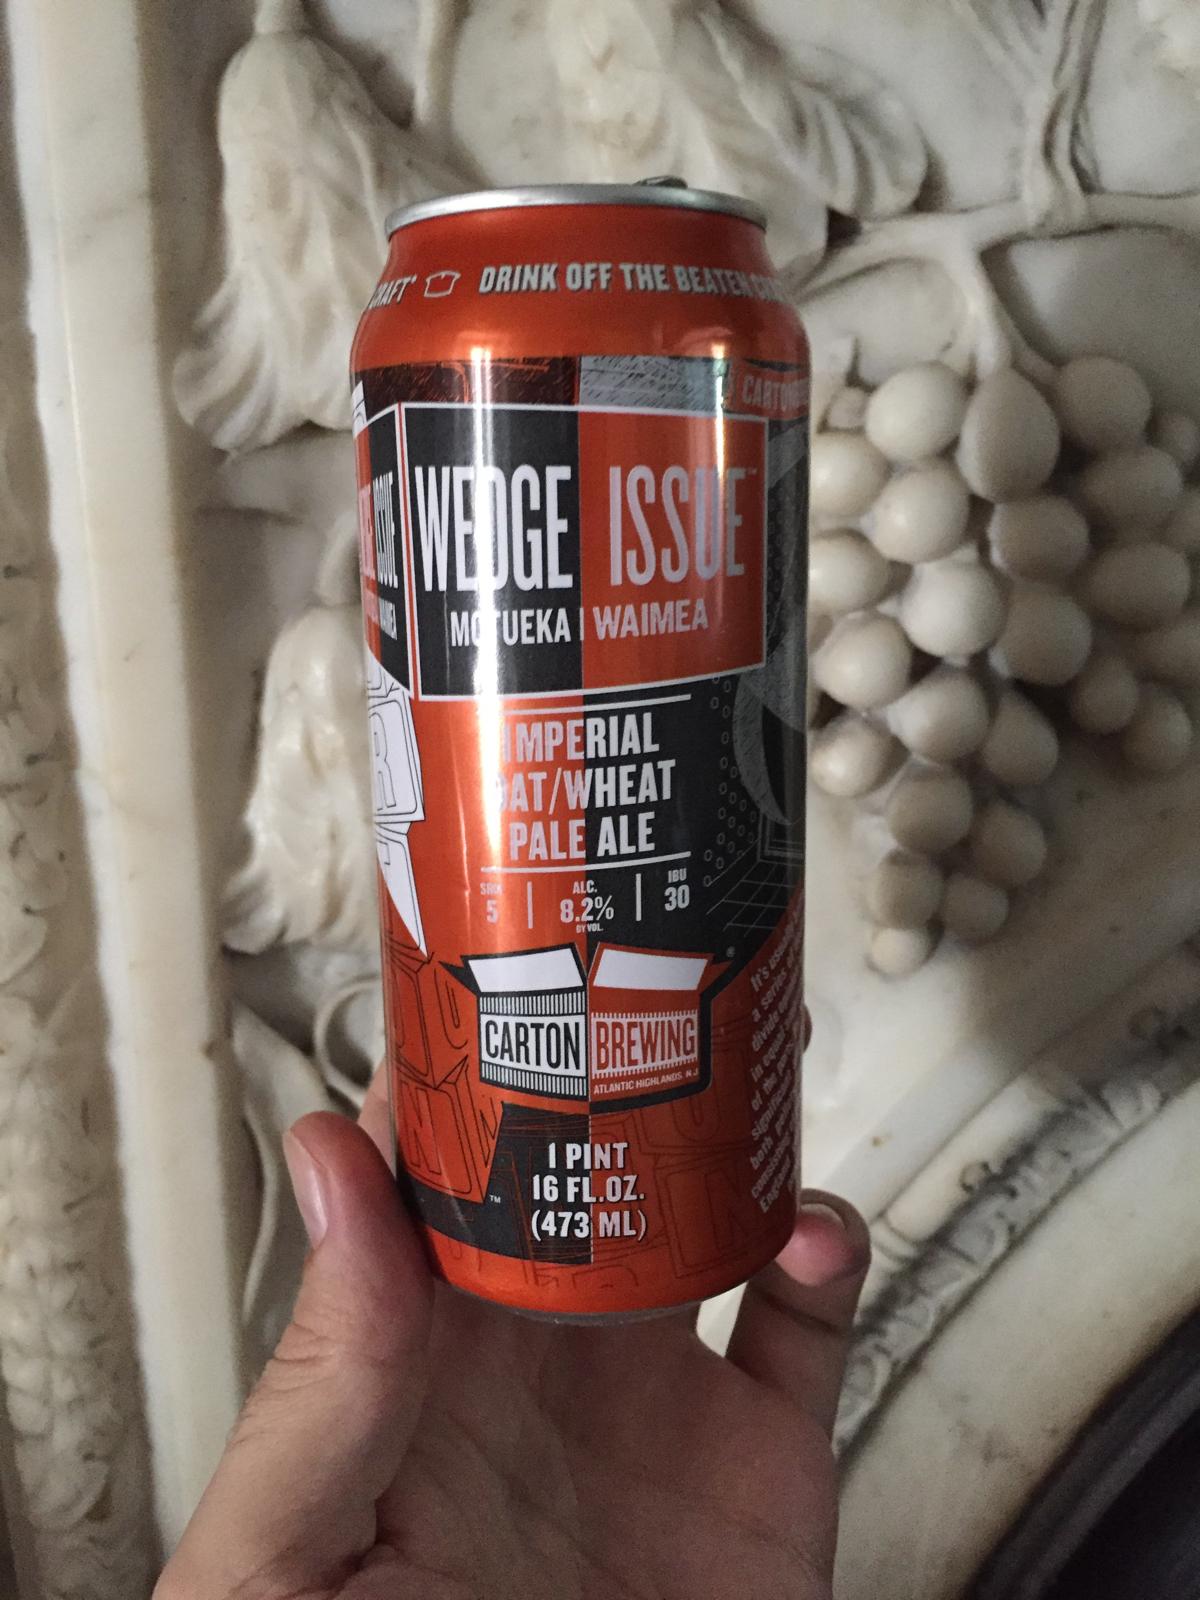 Wedge Issue - Imperial Oat/Wheat Pale Ale